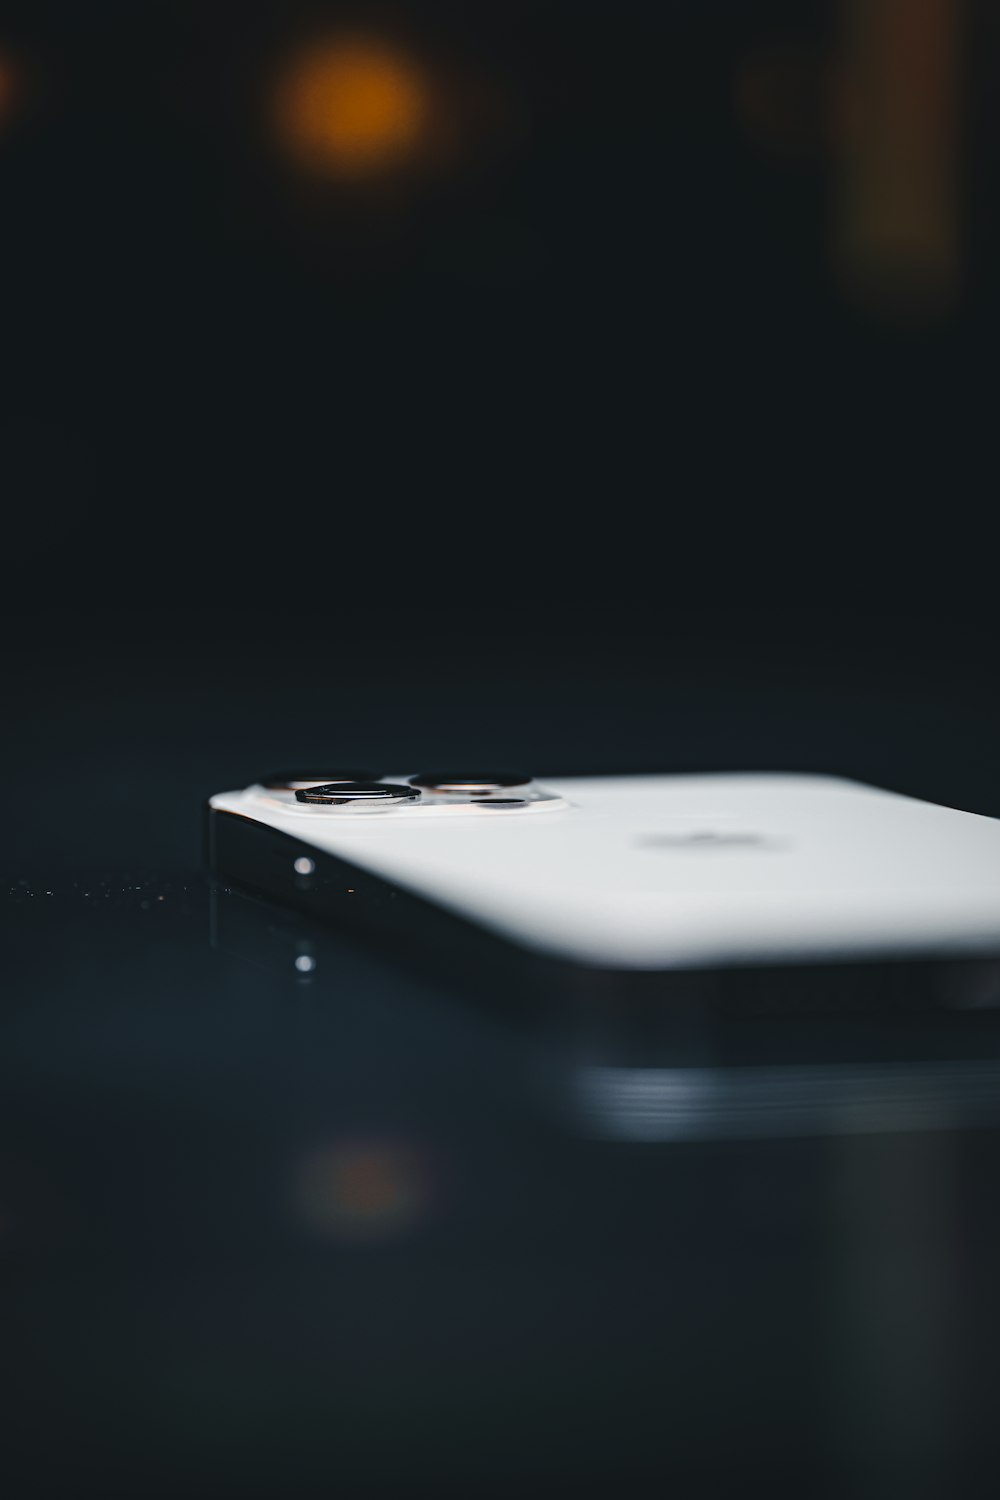 a close up of an apple product on a table